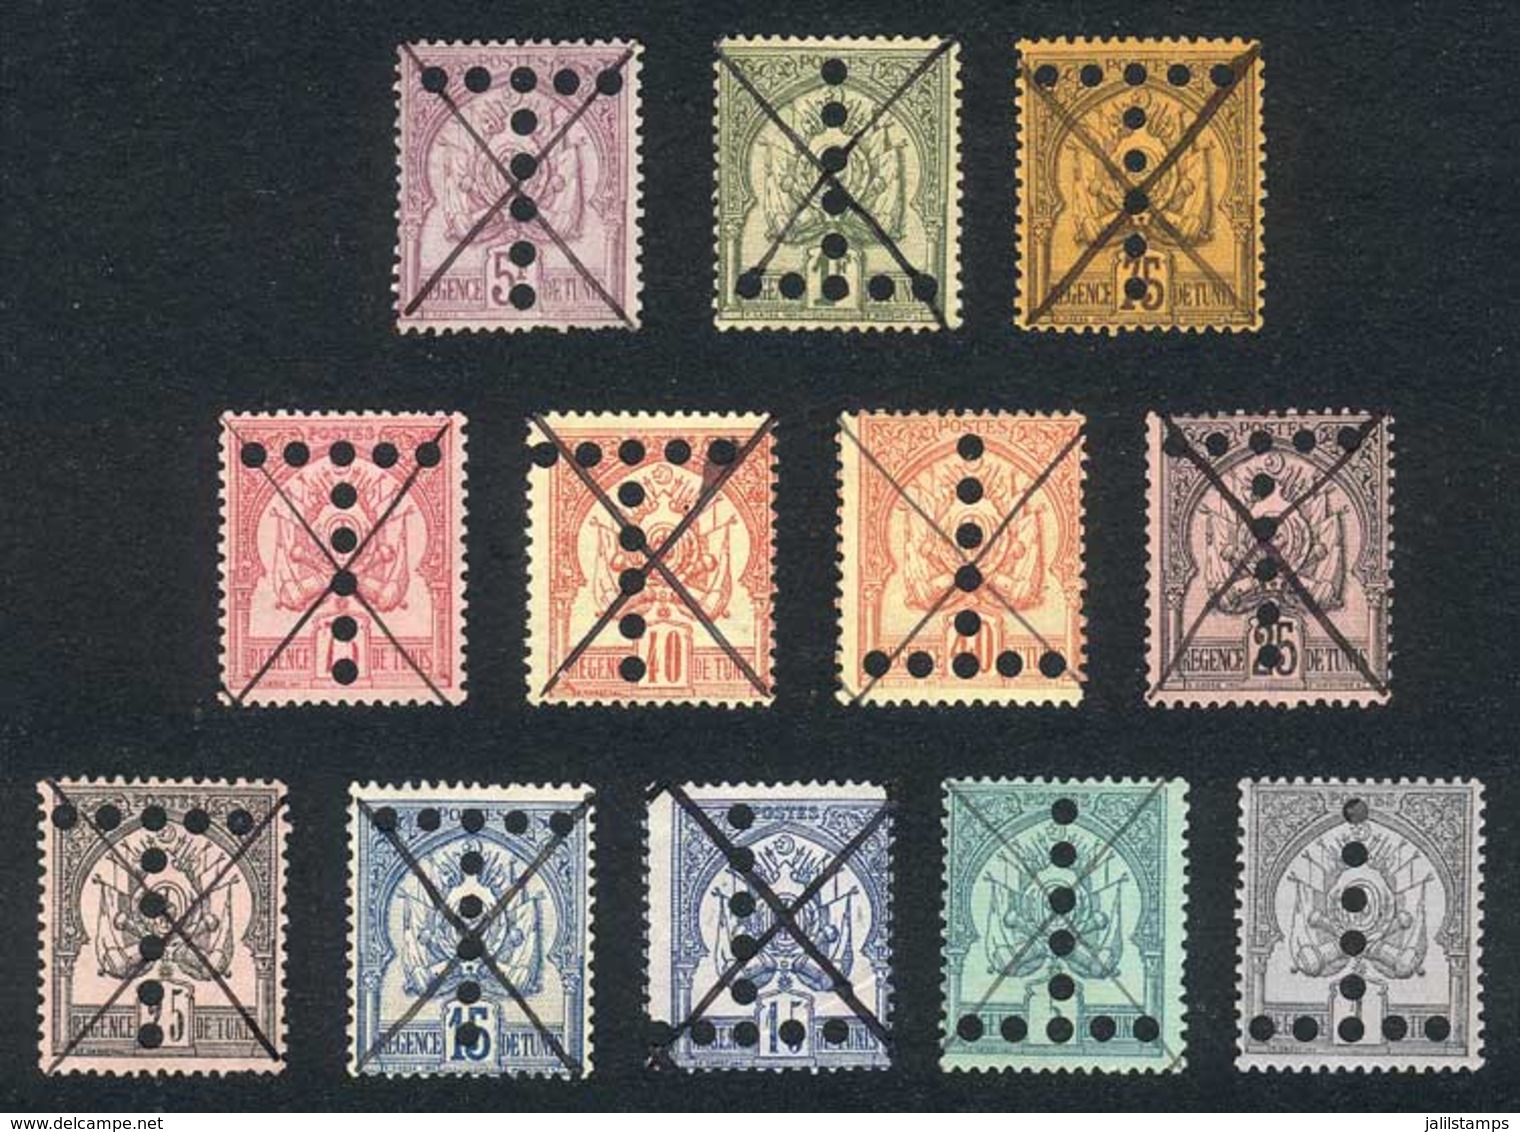 TUNISIA: Lot Of Old Postage Due Stamps, Used Or Mint Without Gum, Excellent Quality, Yvert Catalog Value Euros 400. - Tunesien (1956-...)